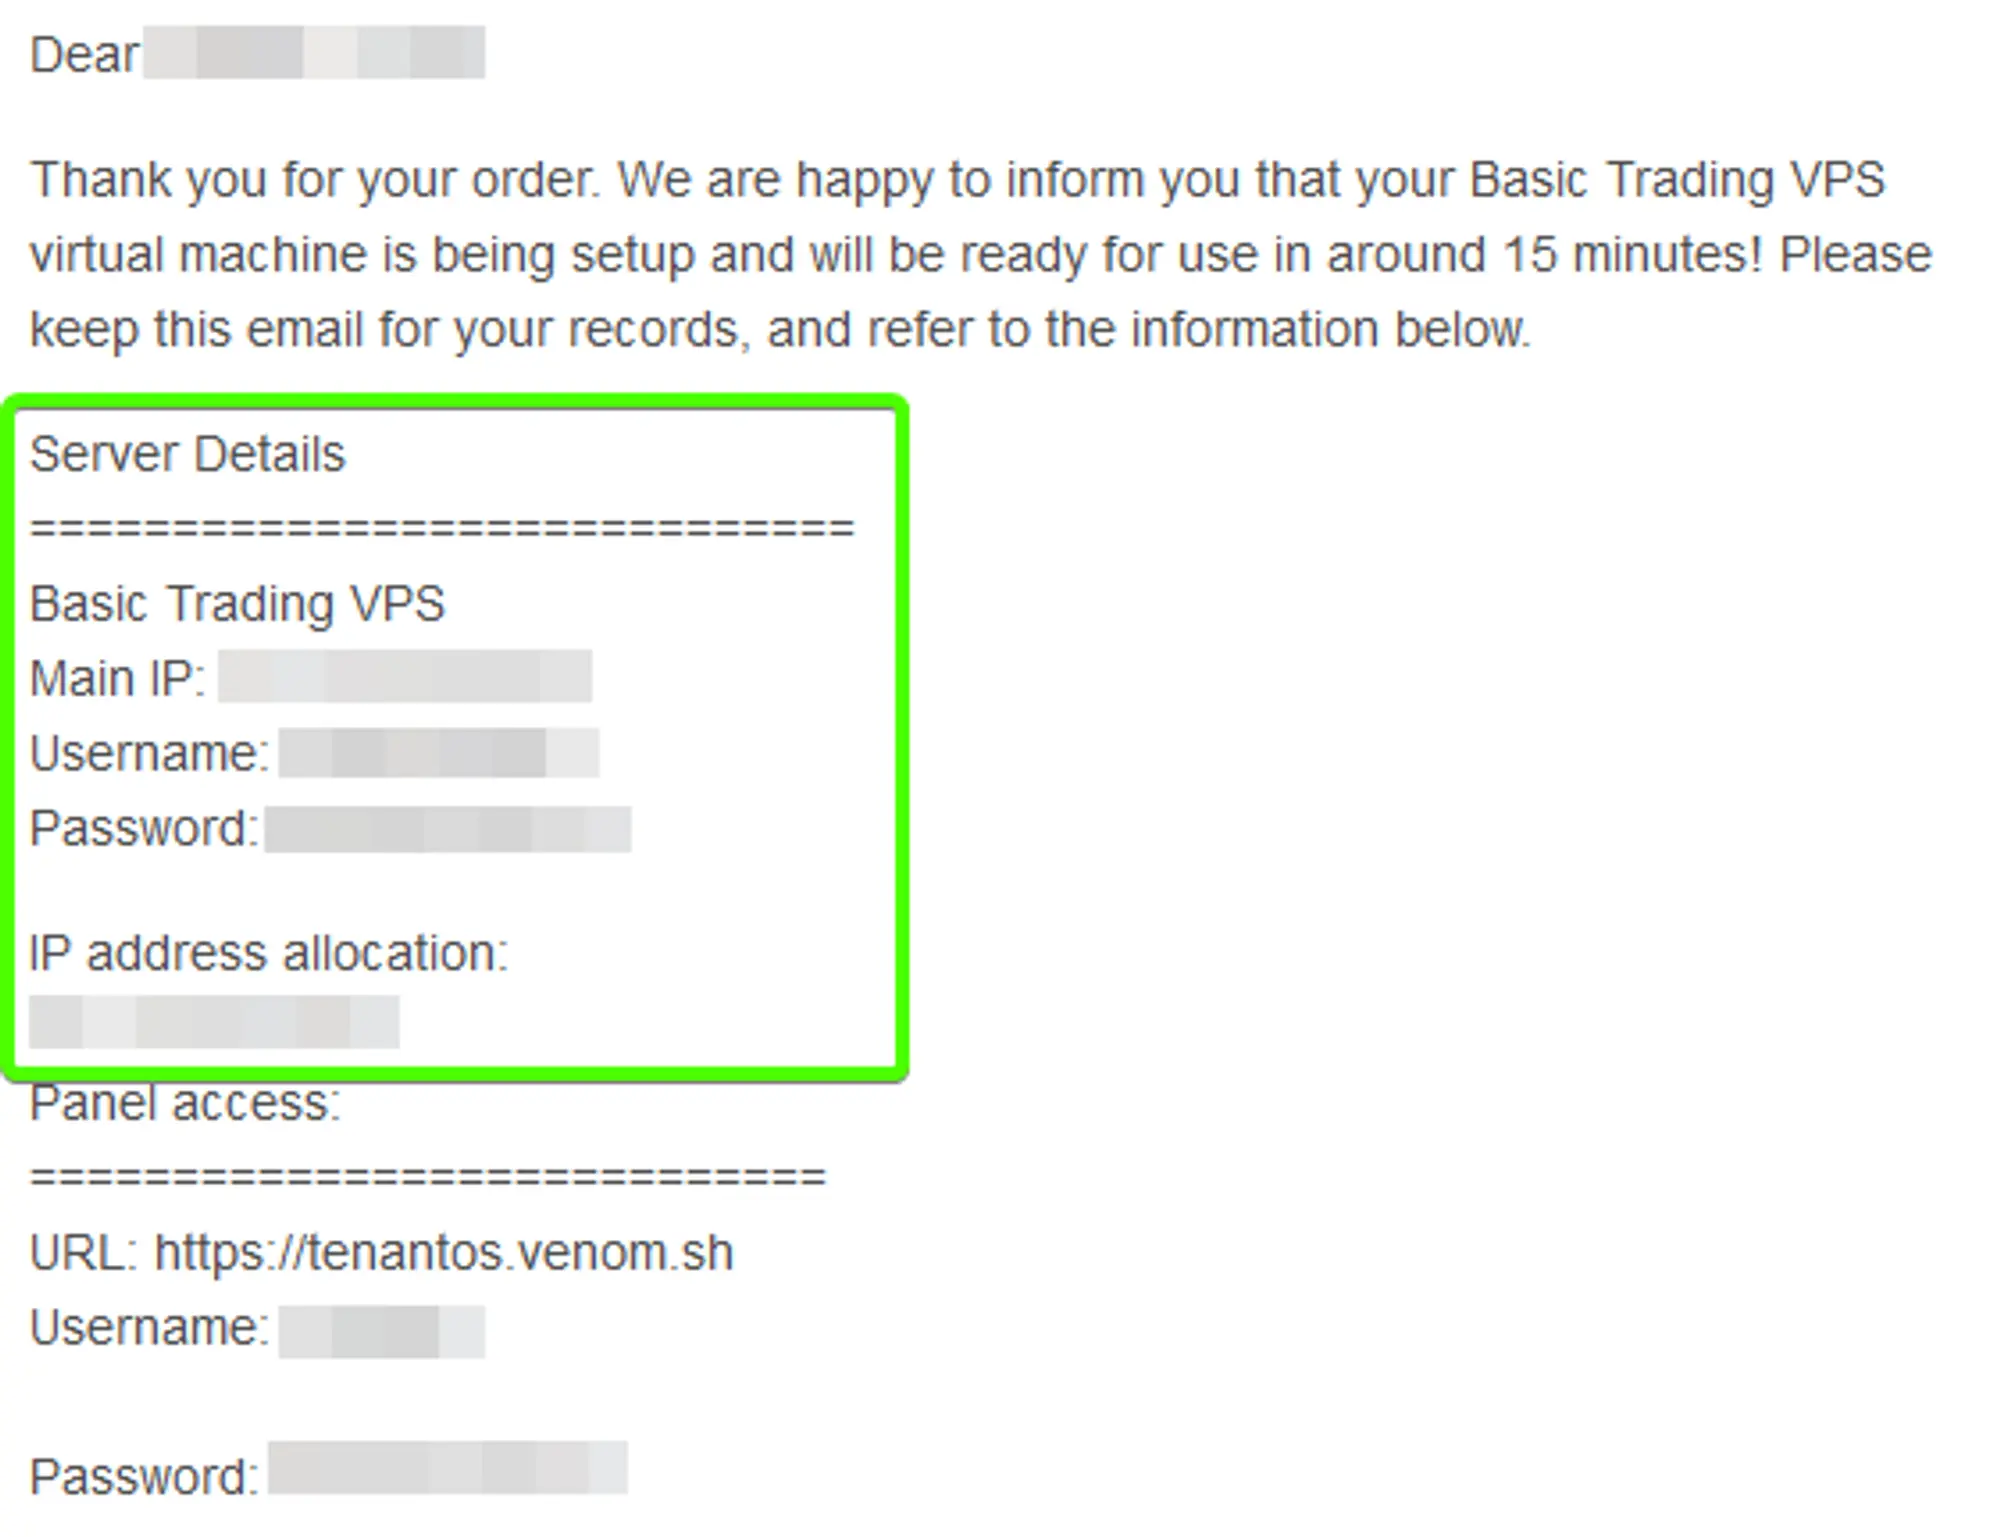 A HostVenom VPS Welcome email for a Basic Trading VPS with a green box surrounding the “Server Details” section in the middle.